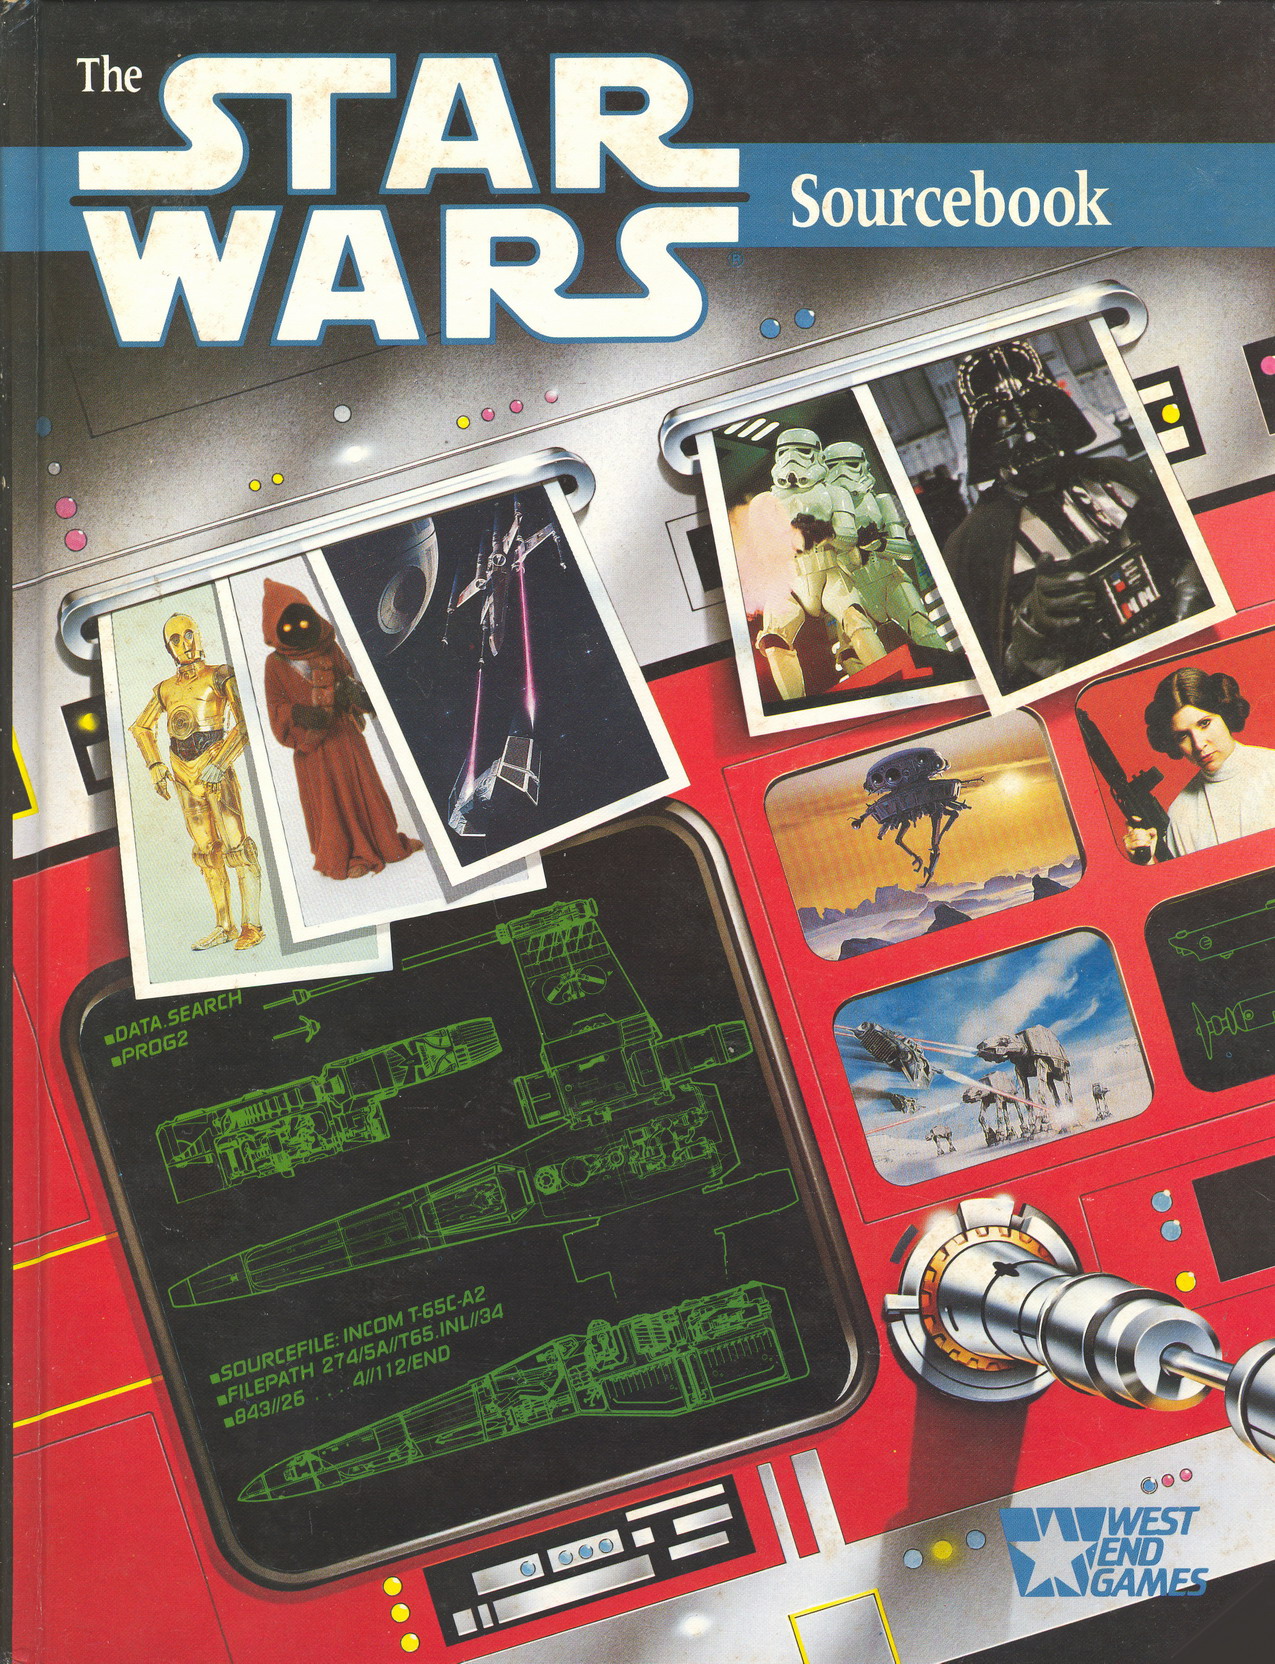 Scum And Villainy (Star Wars Roleplaying Game) Robert J. Schwalb